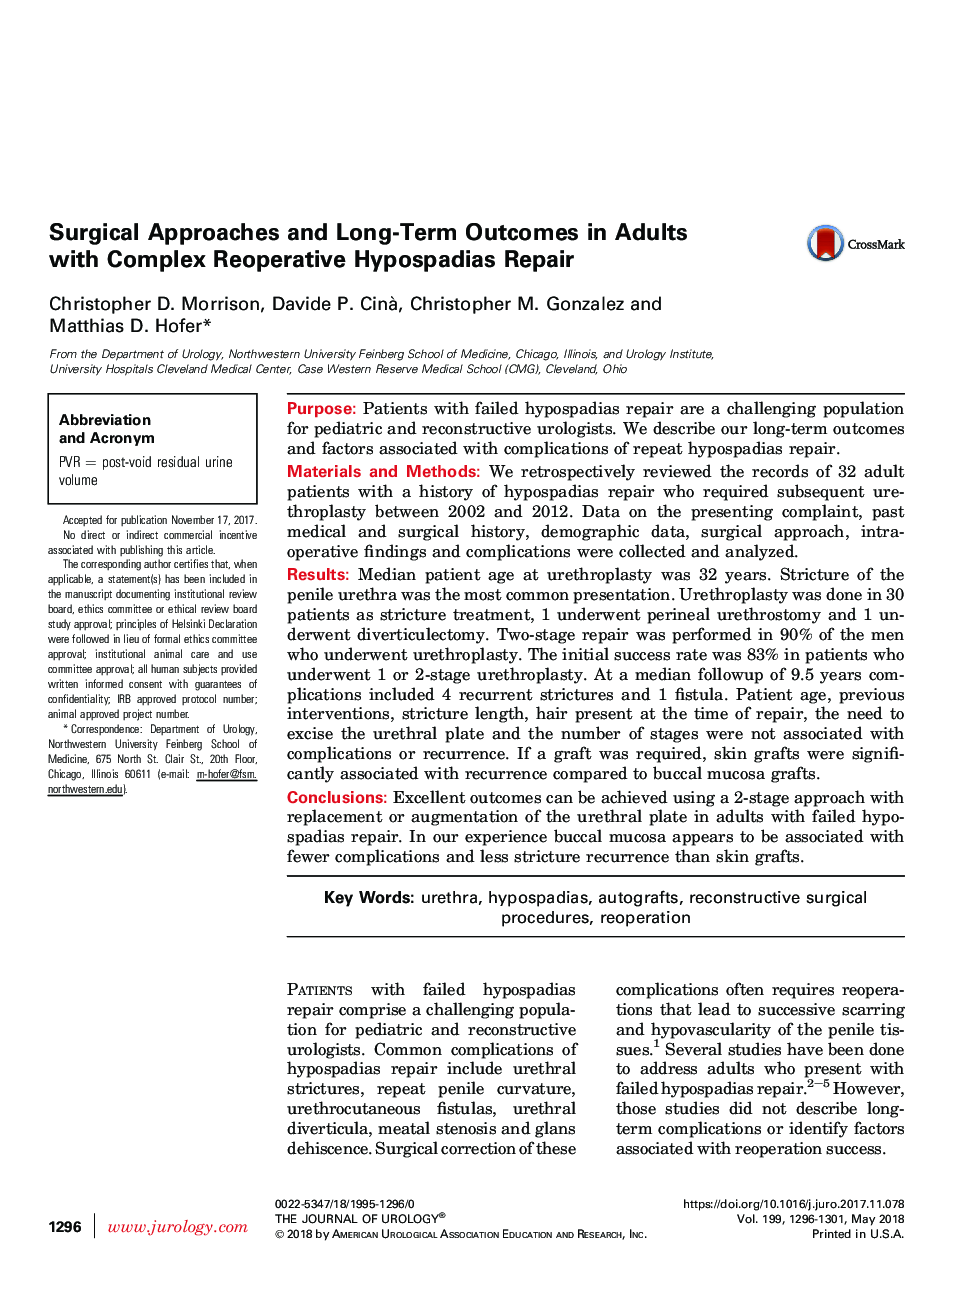 Surgical Approaches and Long-Term Outcomes in Adults with Complex Reoperative Hypospadias Repair